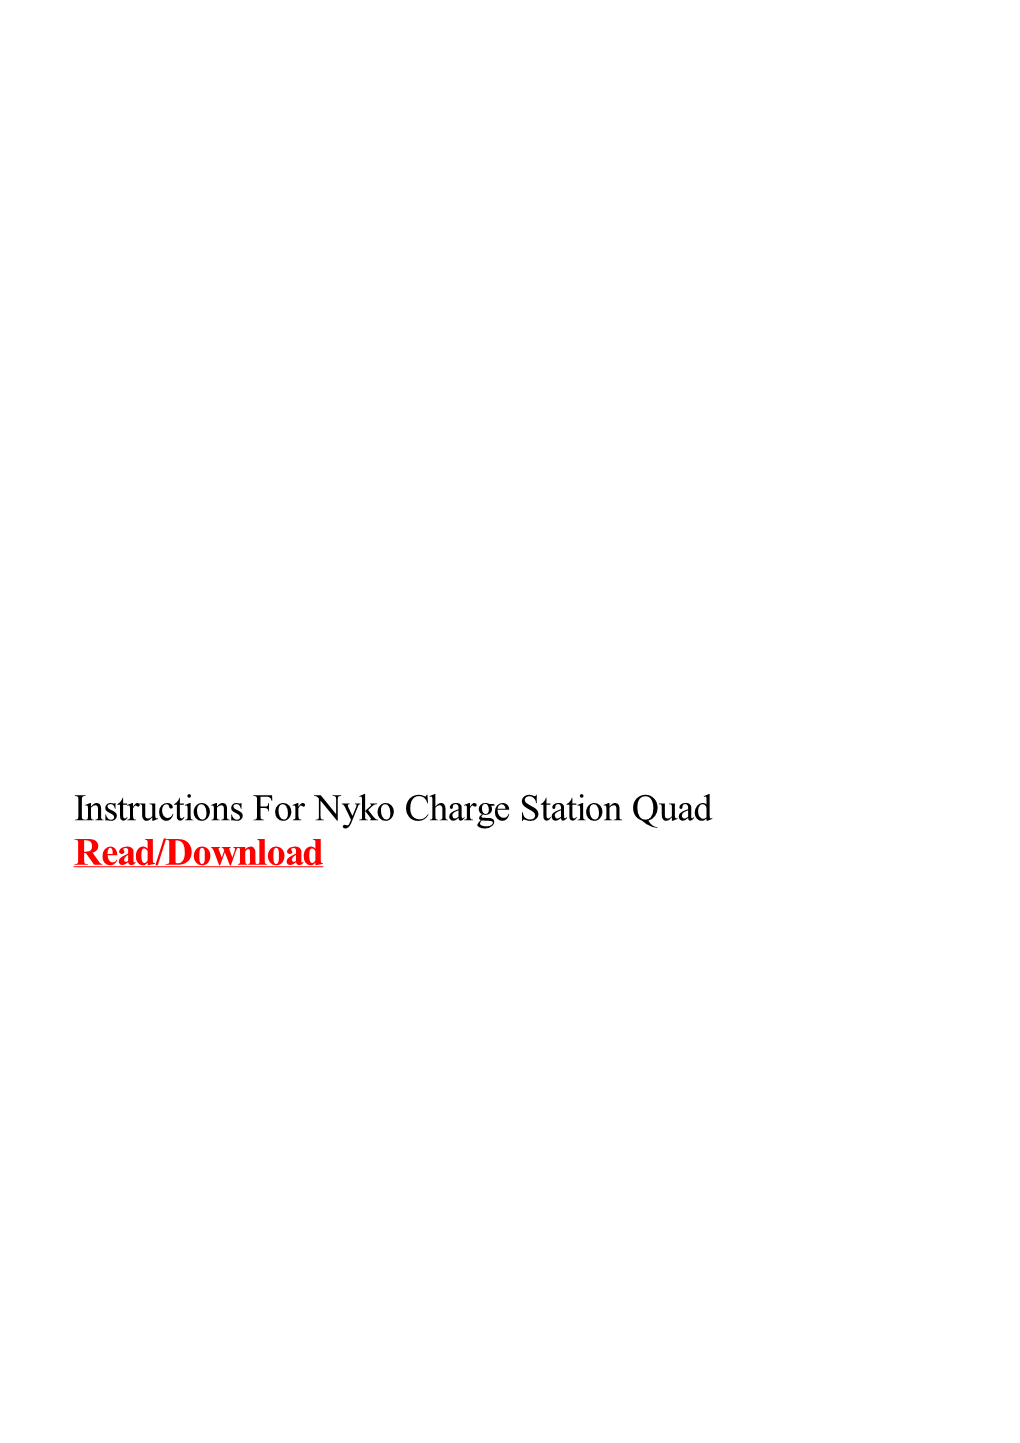 Instructions for Nyko Charge Station Quad.Pdf